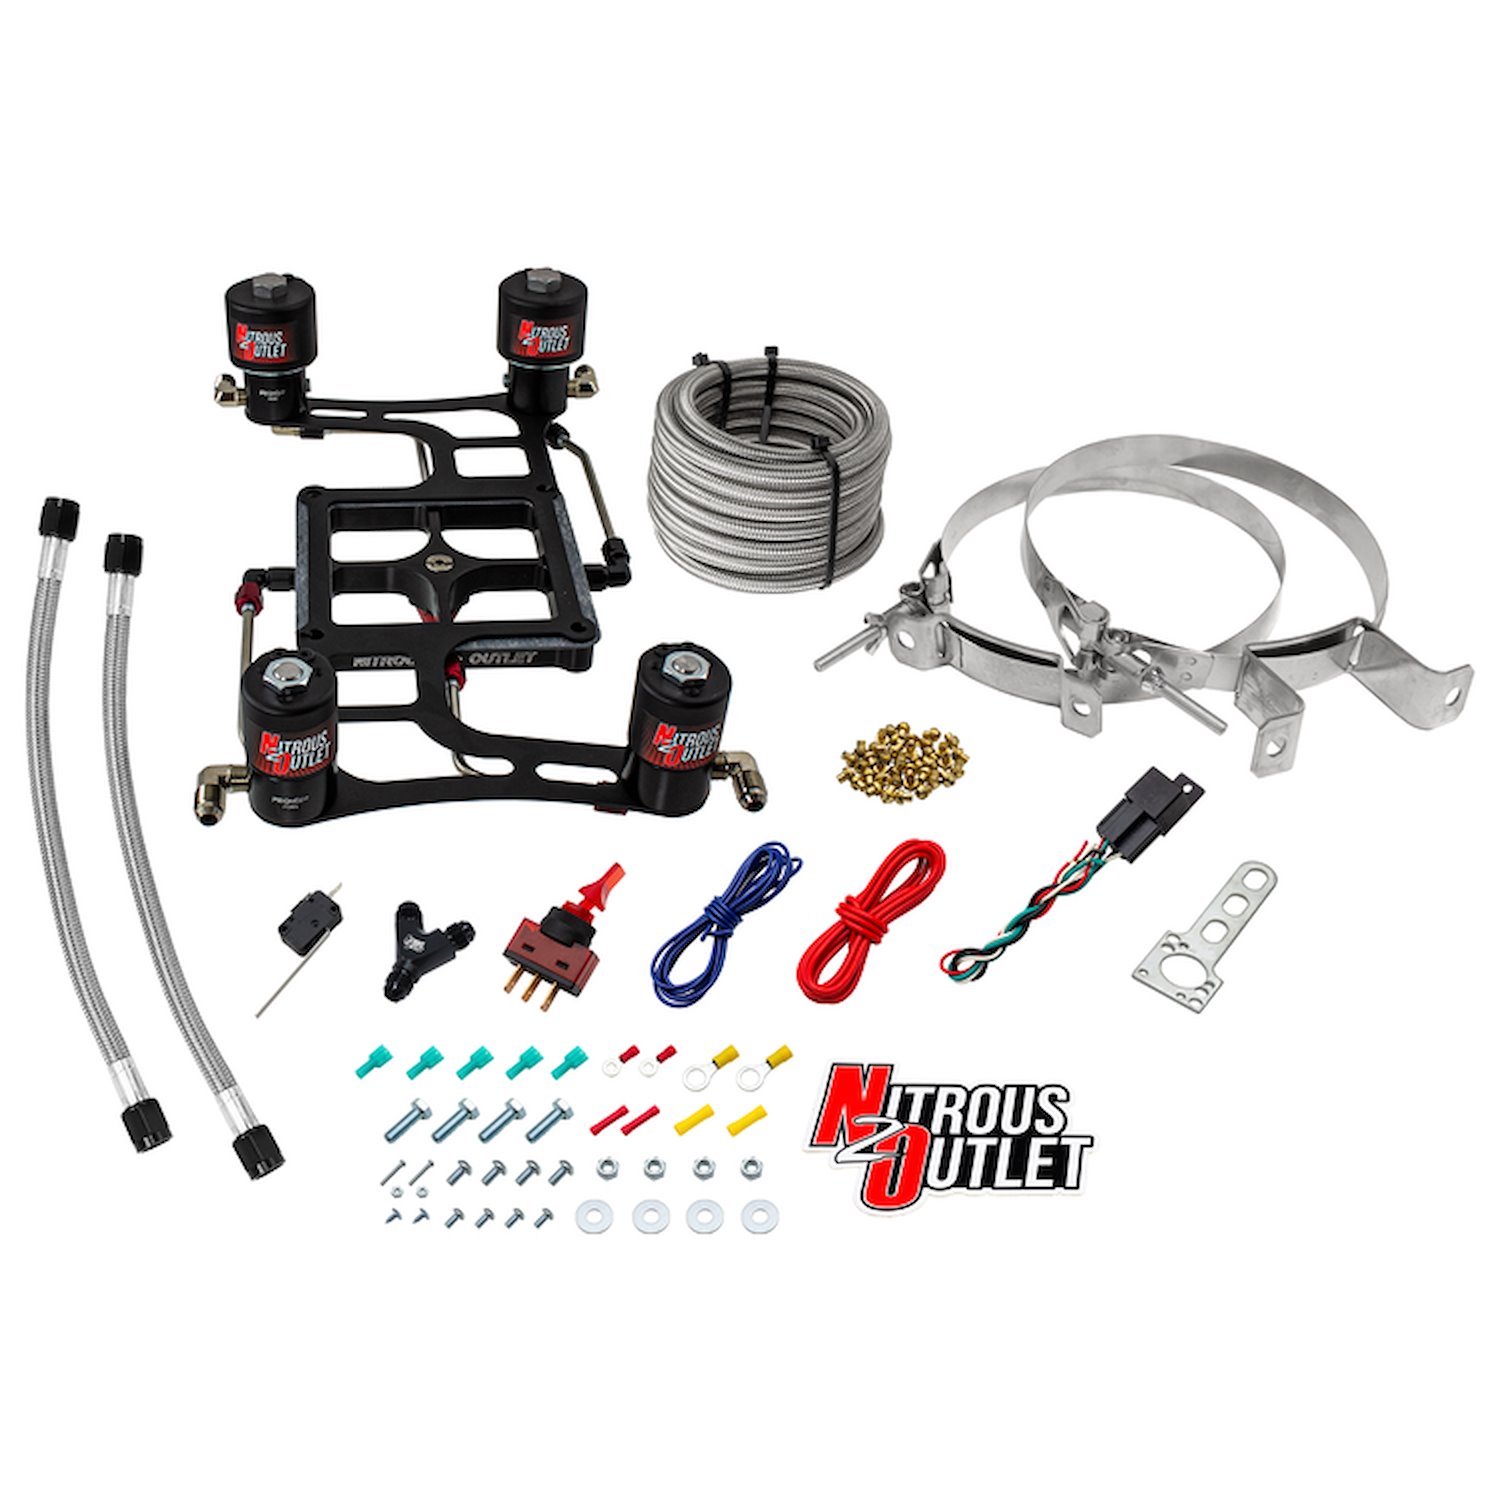 00-10640-00 4500 Hornet 2 Race Dual-Stage System, Hard-Line